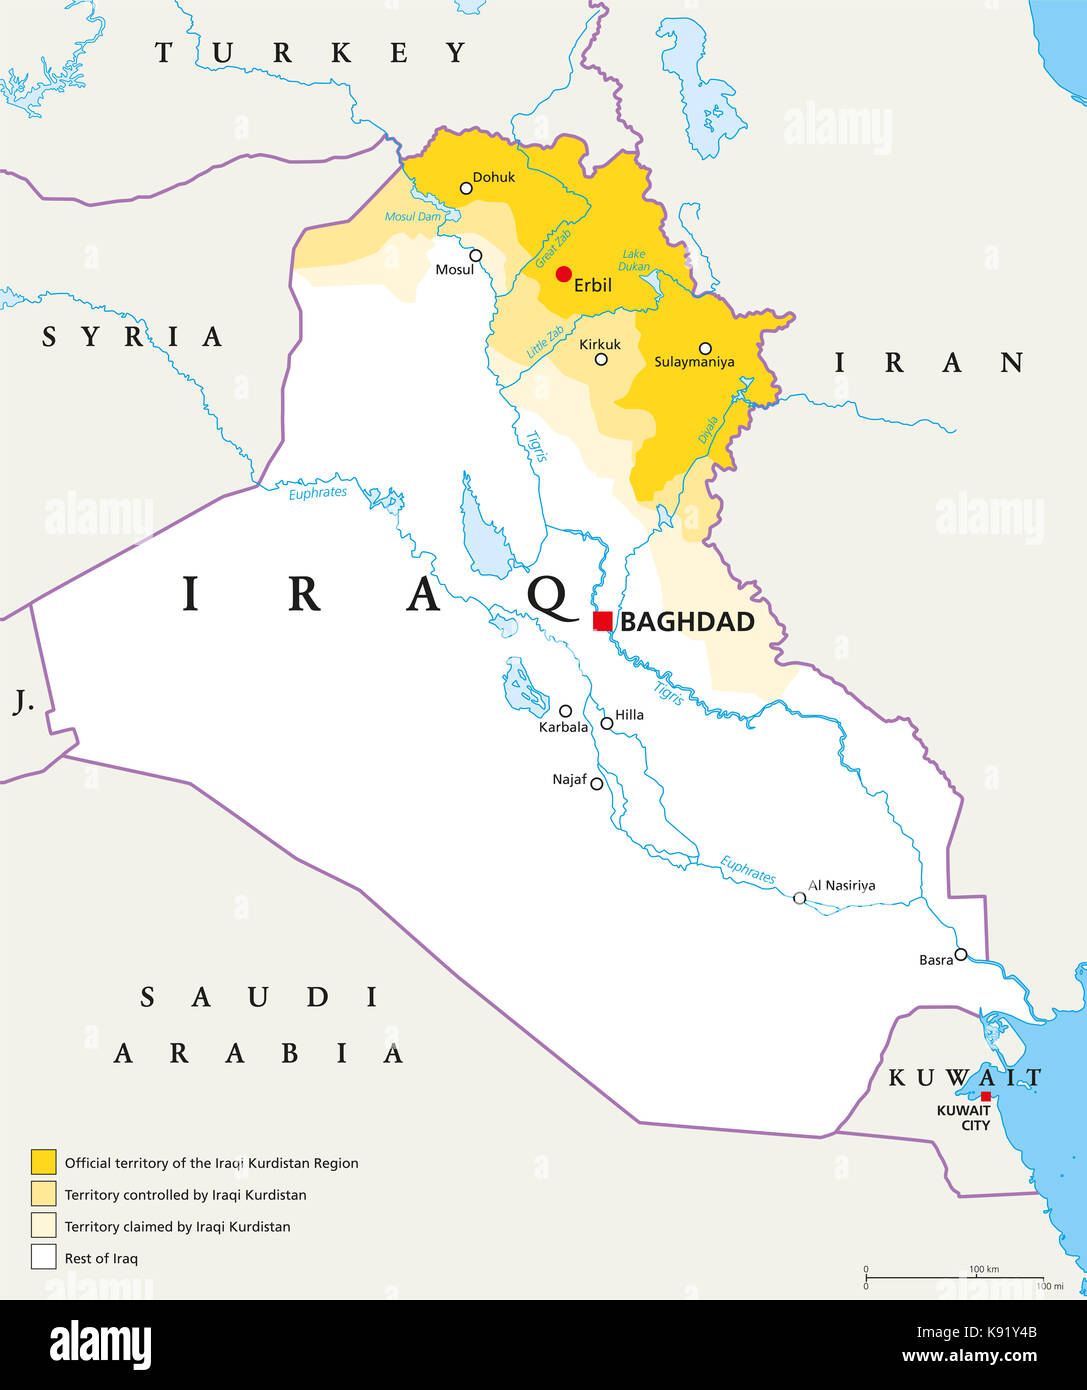 Iraqi Kurdistan Region political map. Official, controlled and claimed territories in Iraq. English labeling. Illustration. Stock Photo